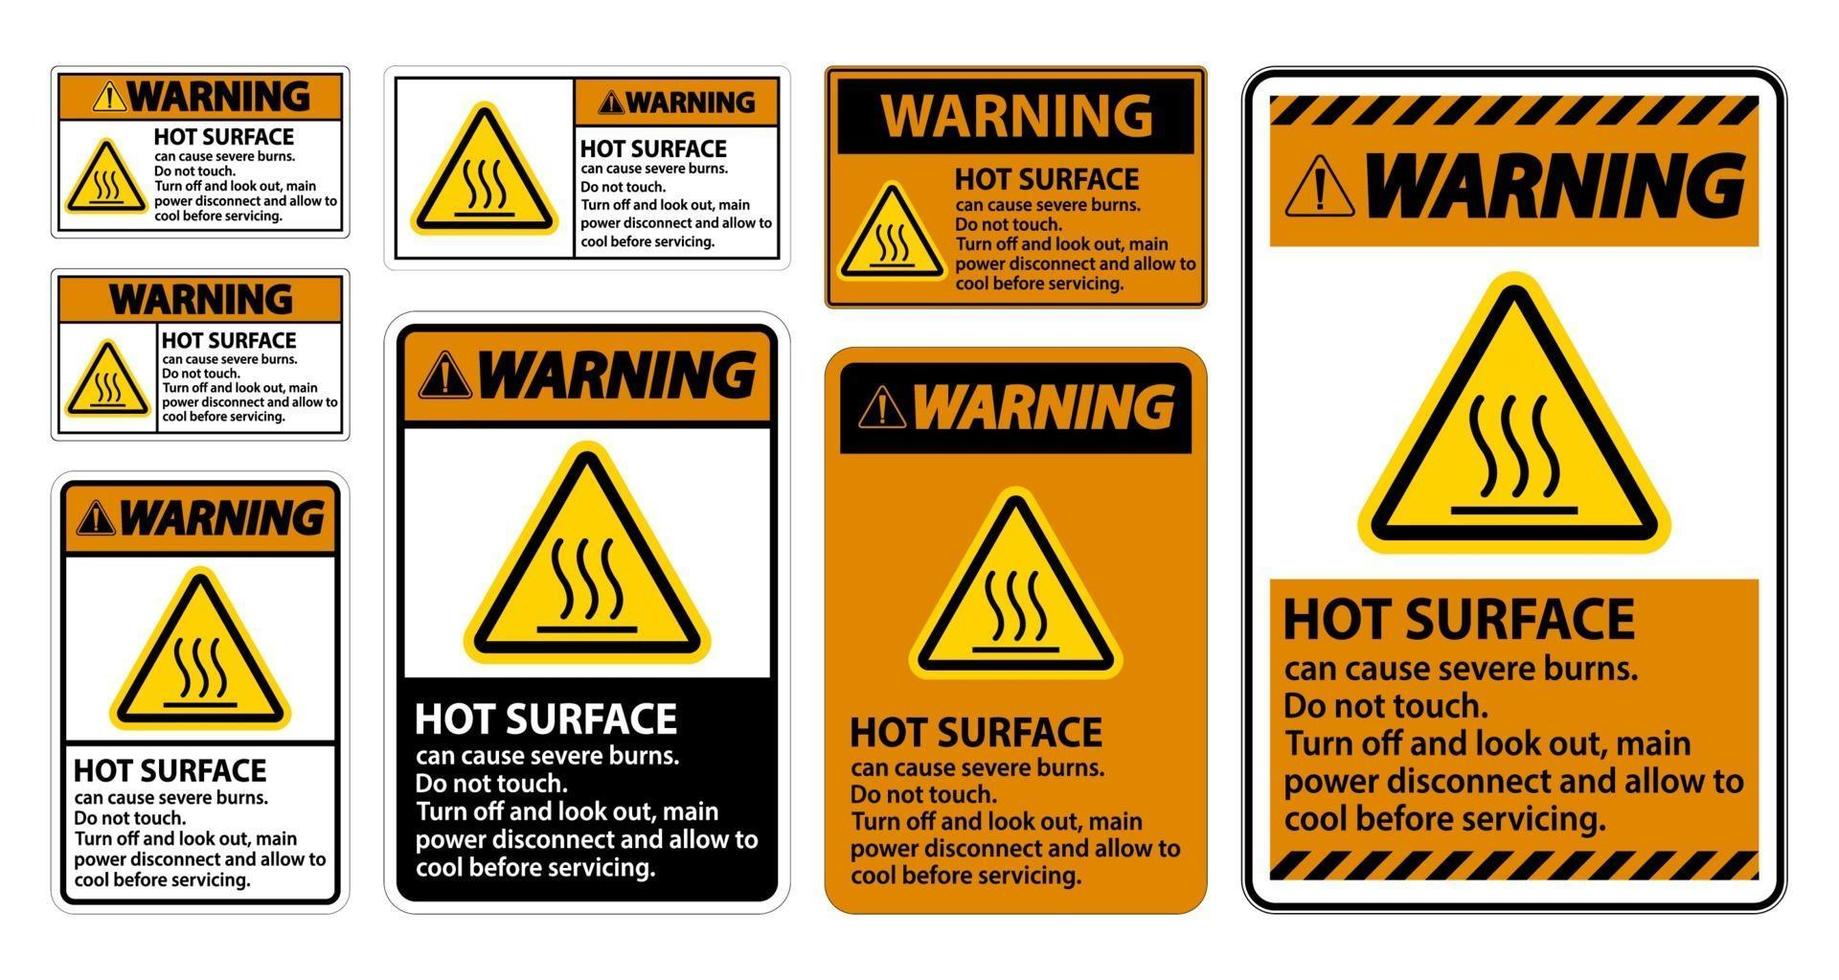 Warning Hot surface sign on white background vector